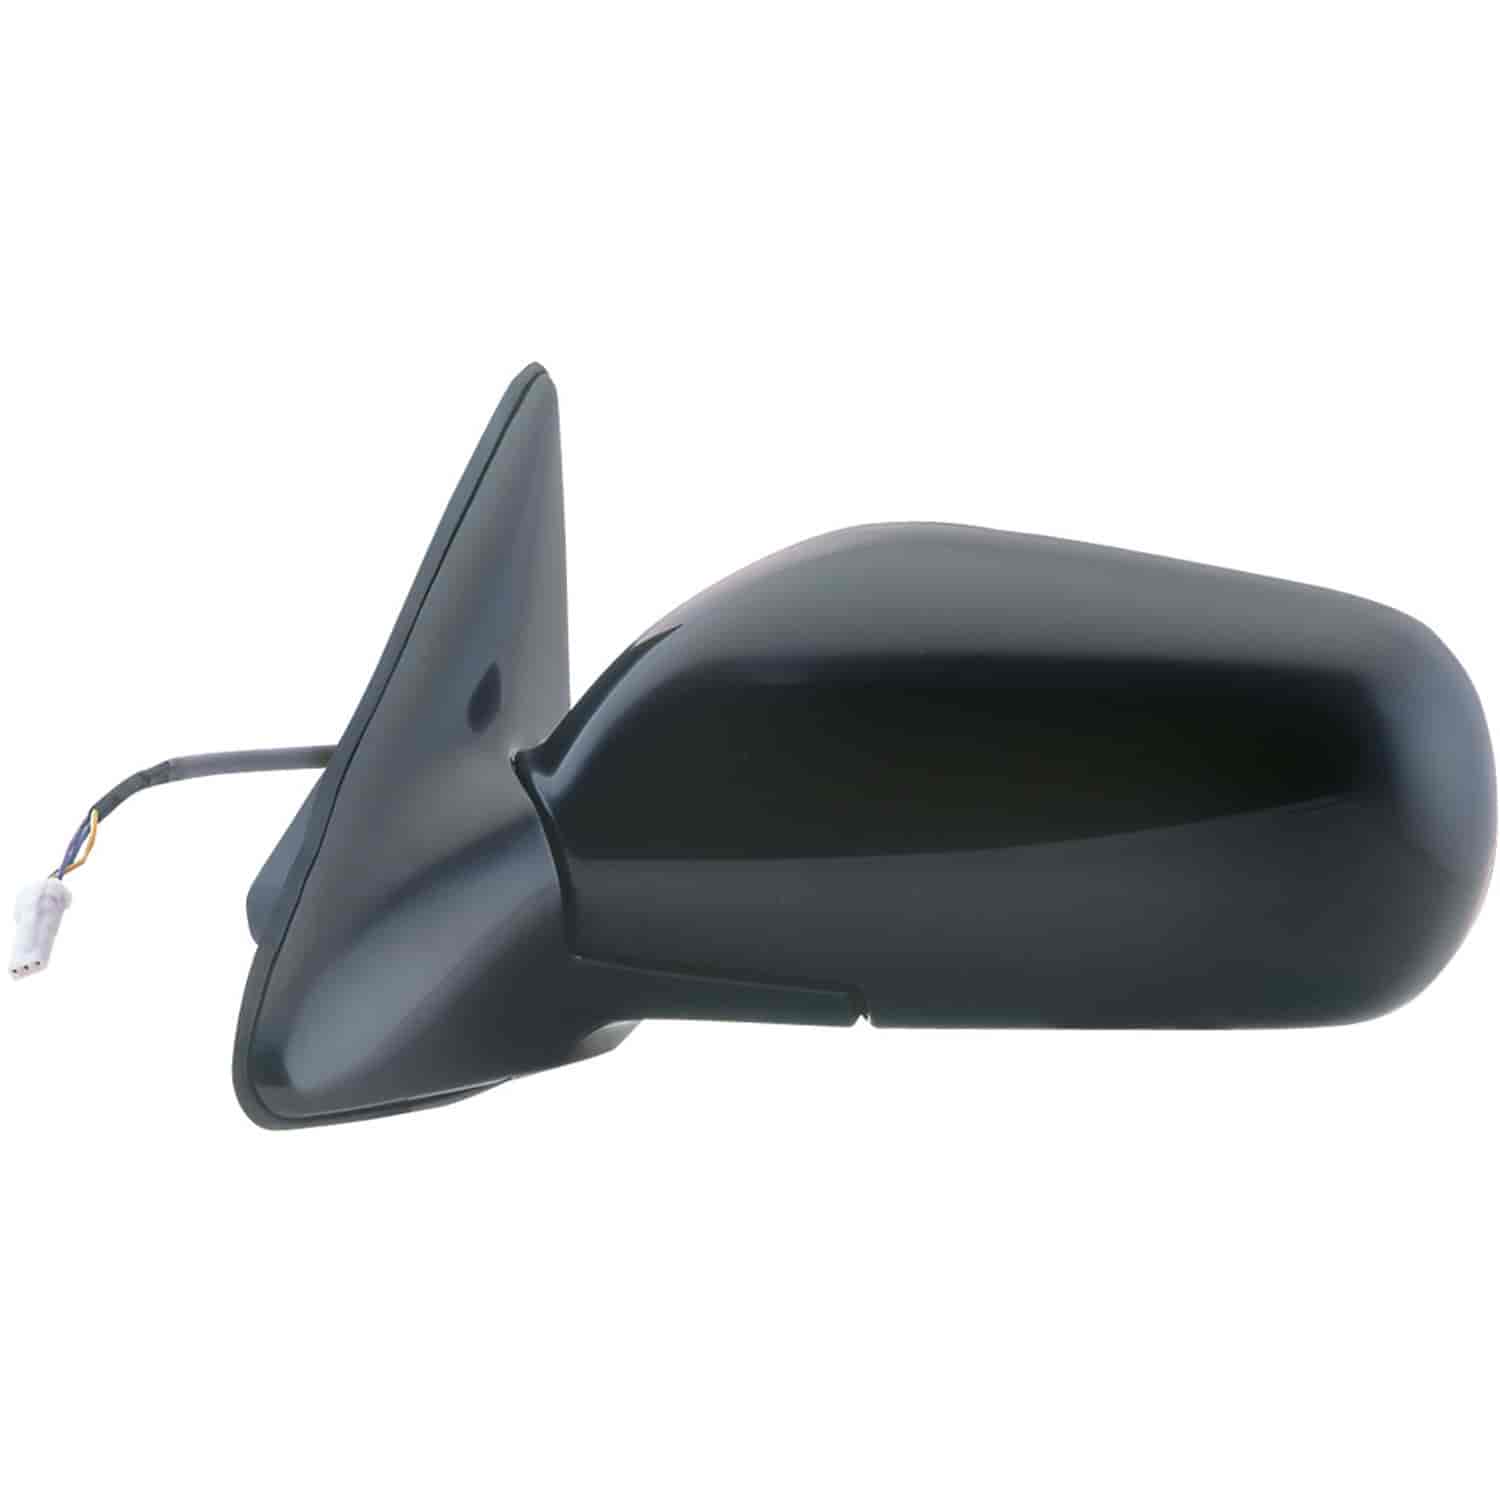 OEM Style Replacement mirror for 91-96 Infiniti G20 driver side mirror tested to fit and function li